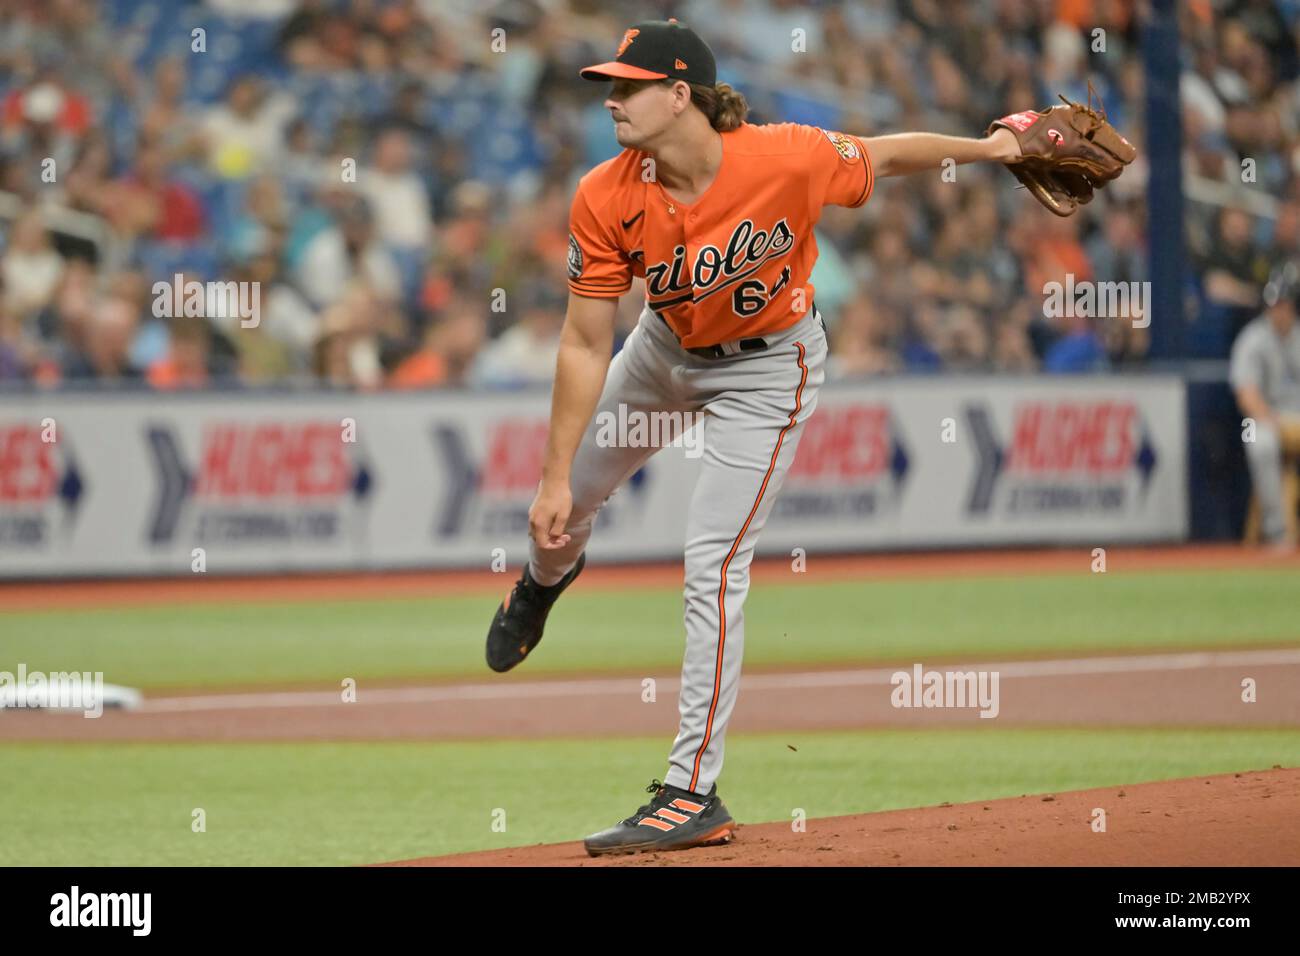 Orioles starter Dean Kremer is pitching better than ever before